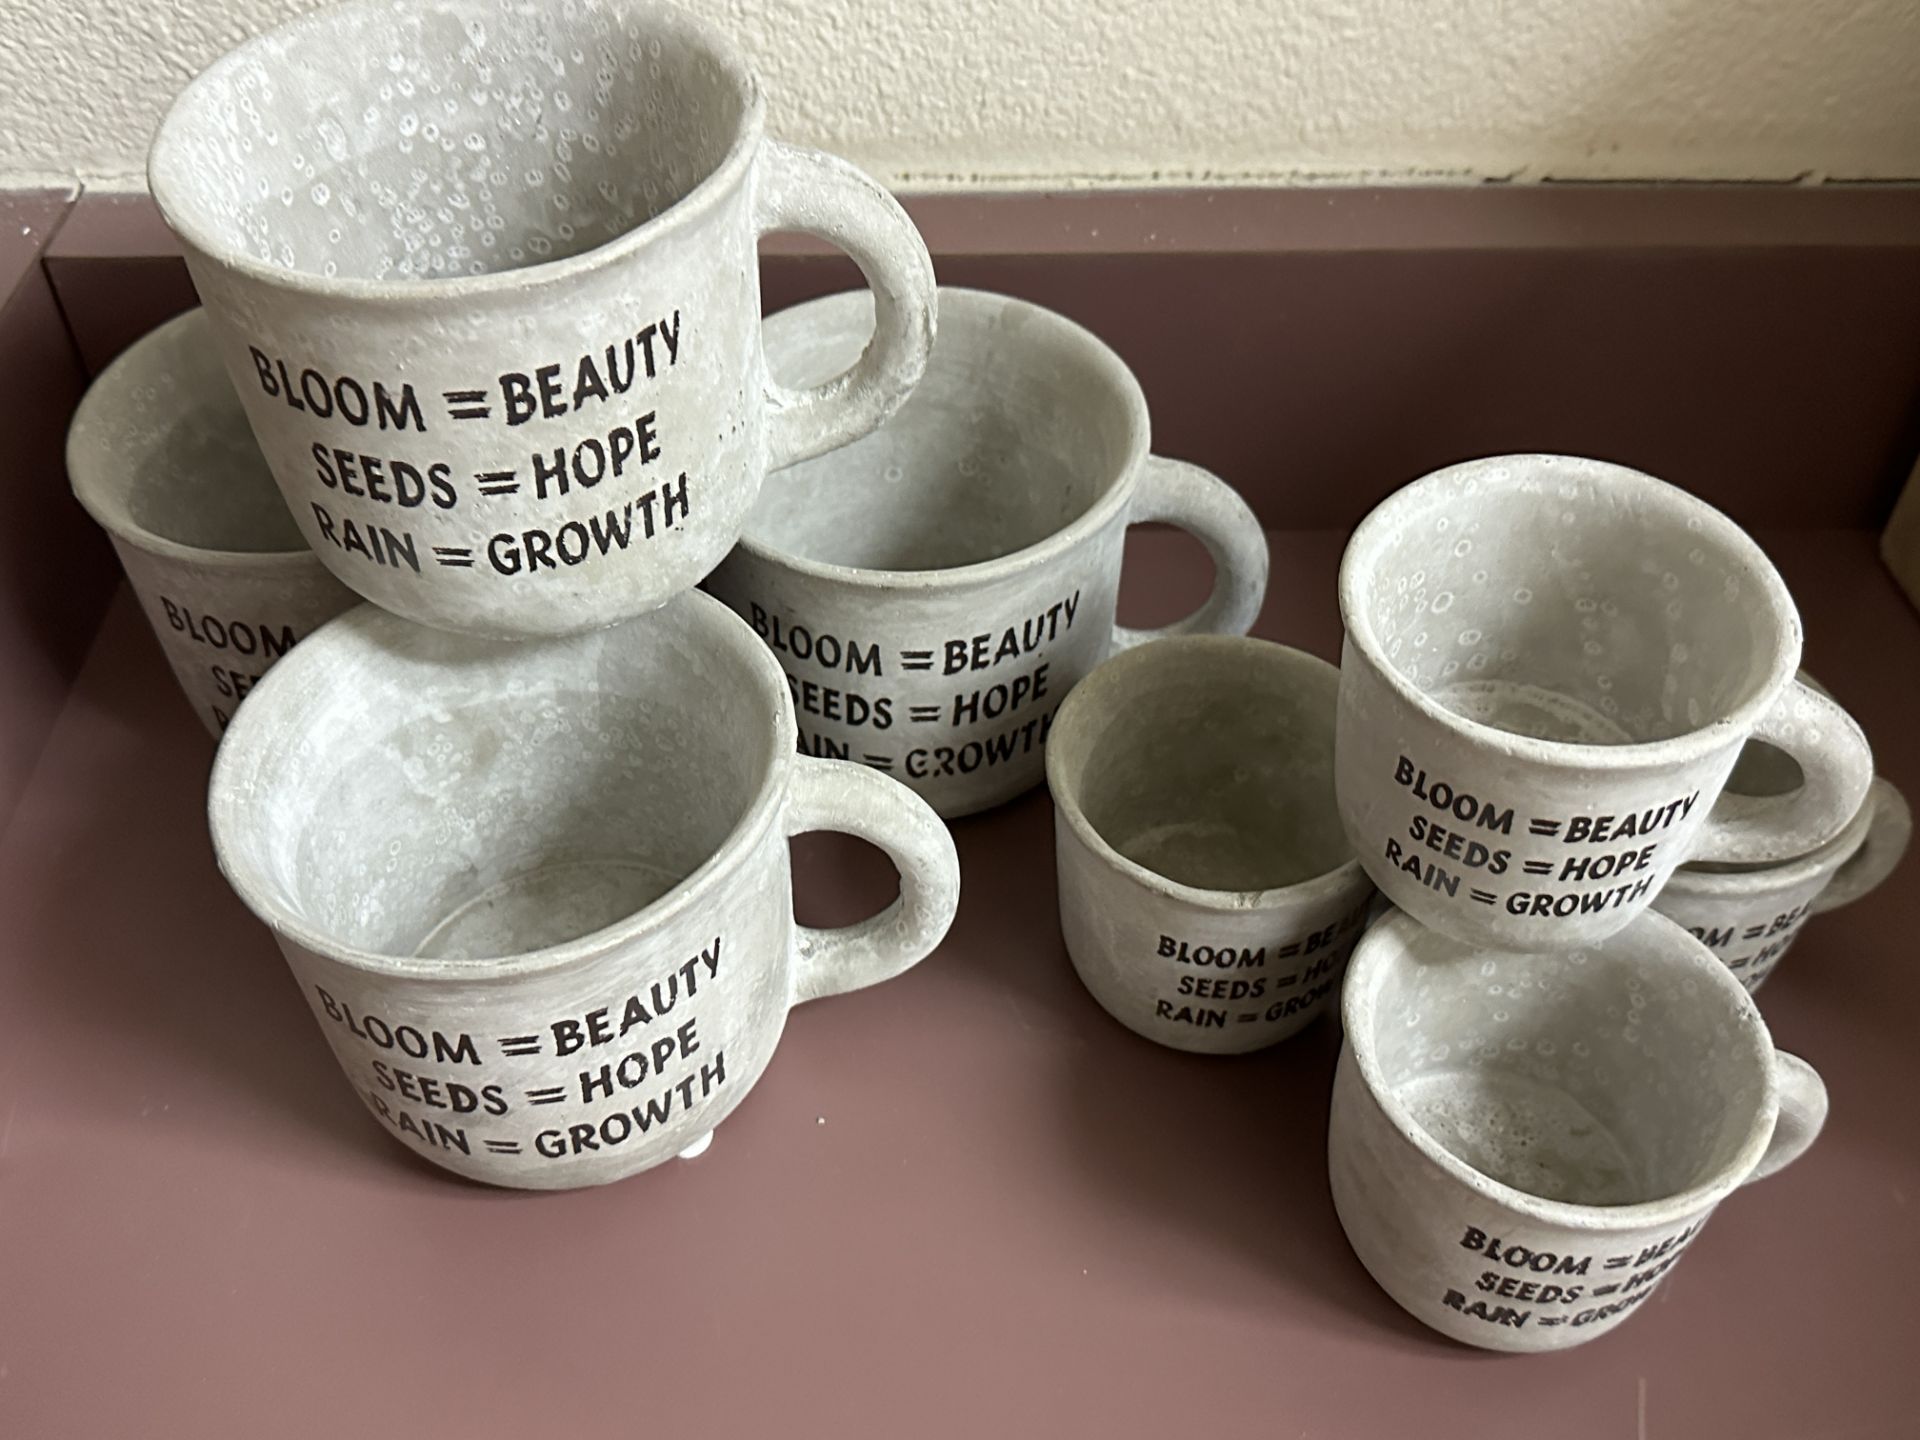 8x Flower Pot Mugs in the shape of coffee mugs - Image 2 of 4